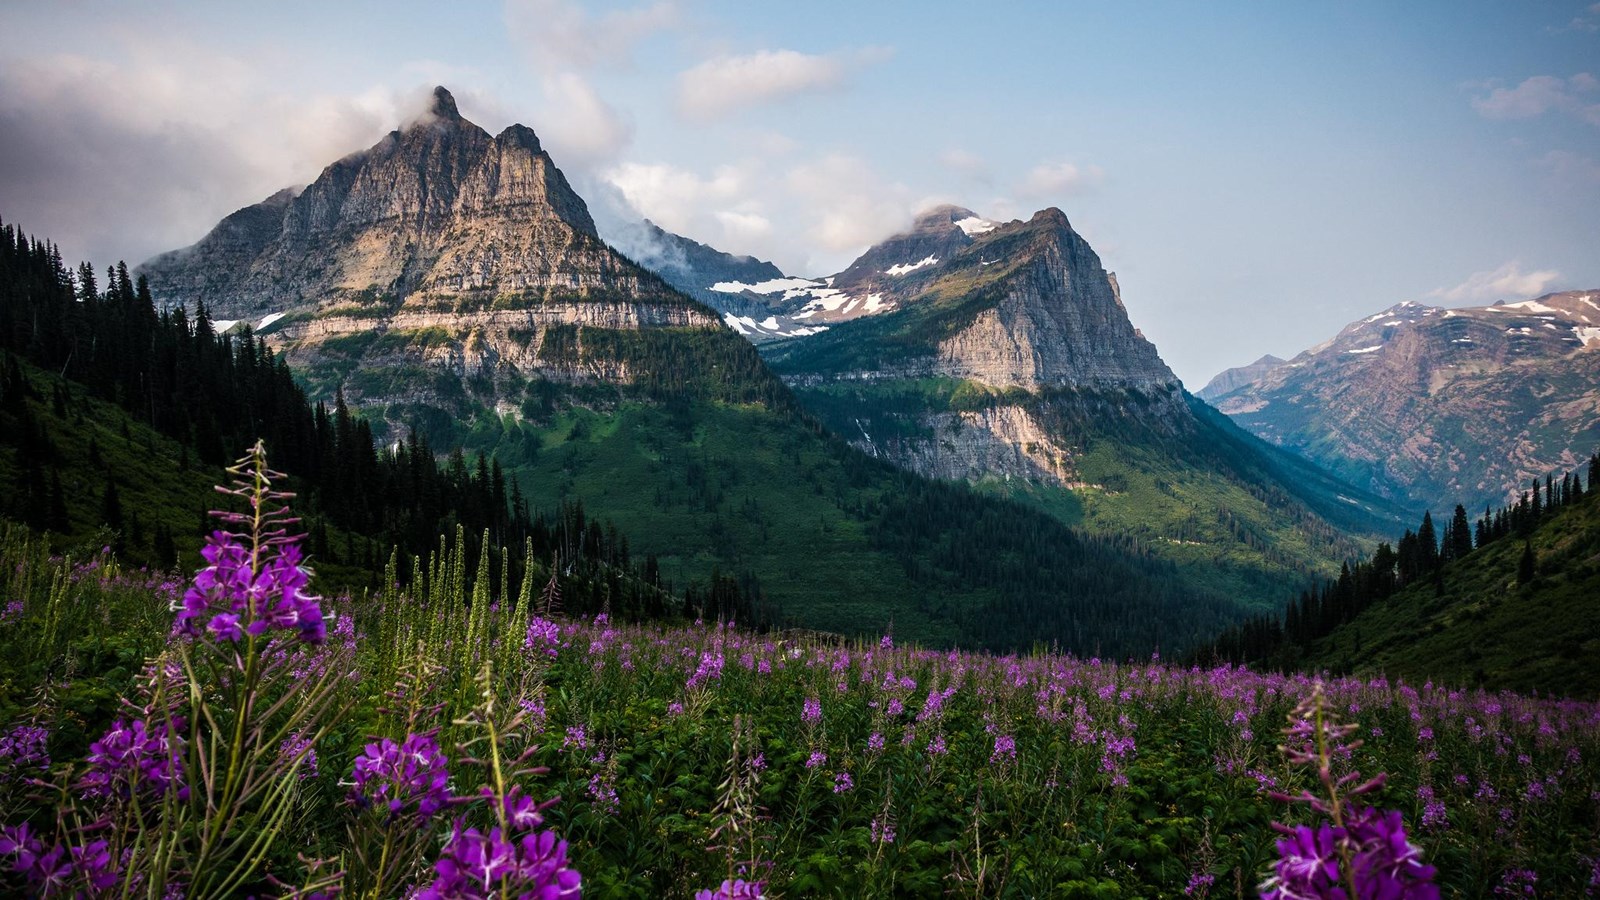 Purple fireweed flowers in front of a scenic mountain view